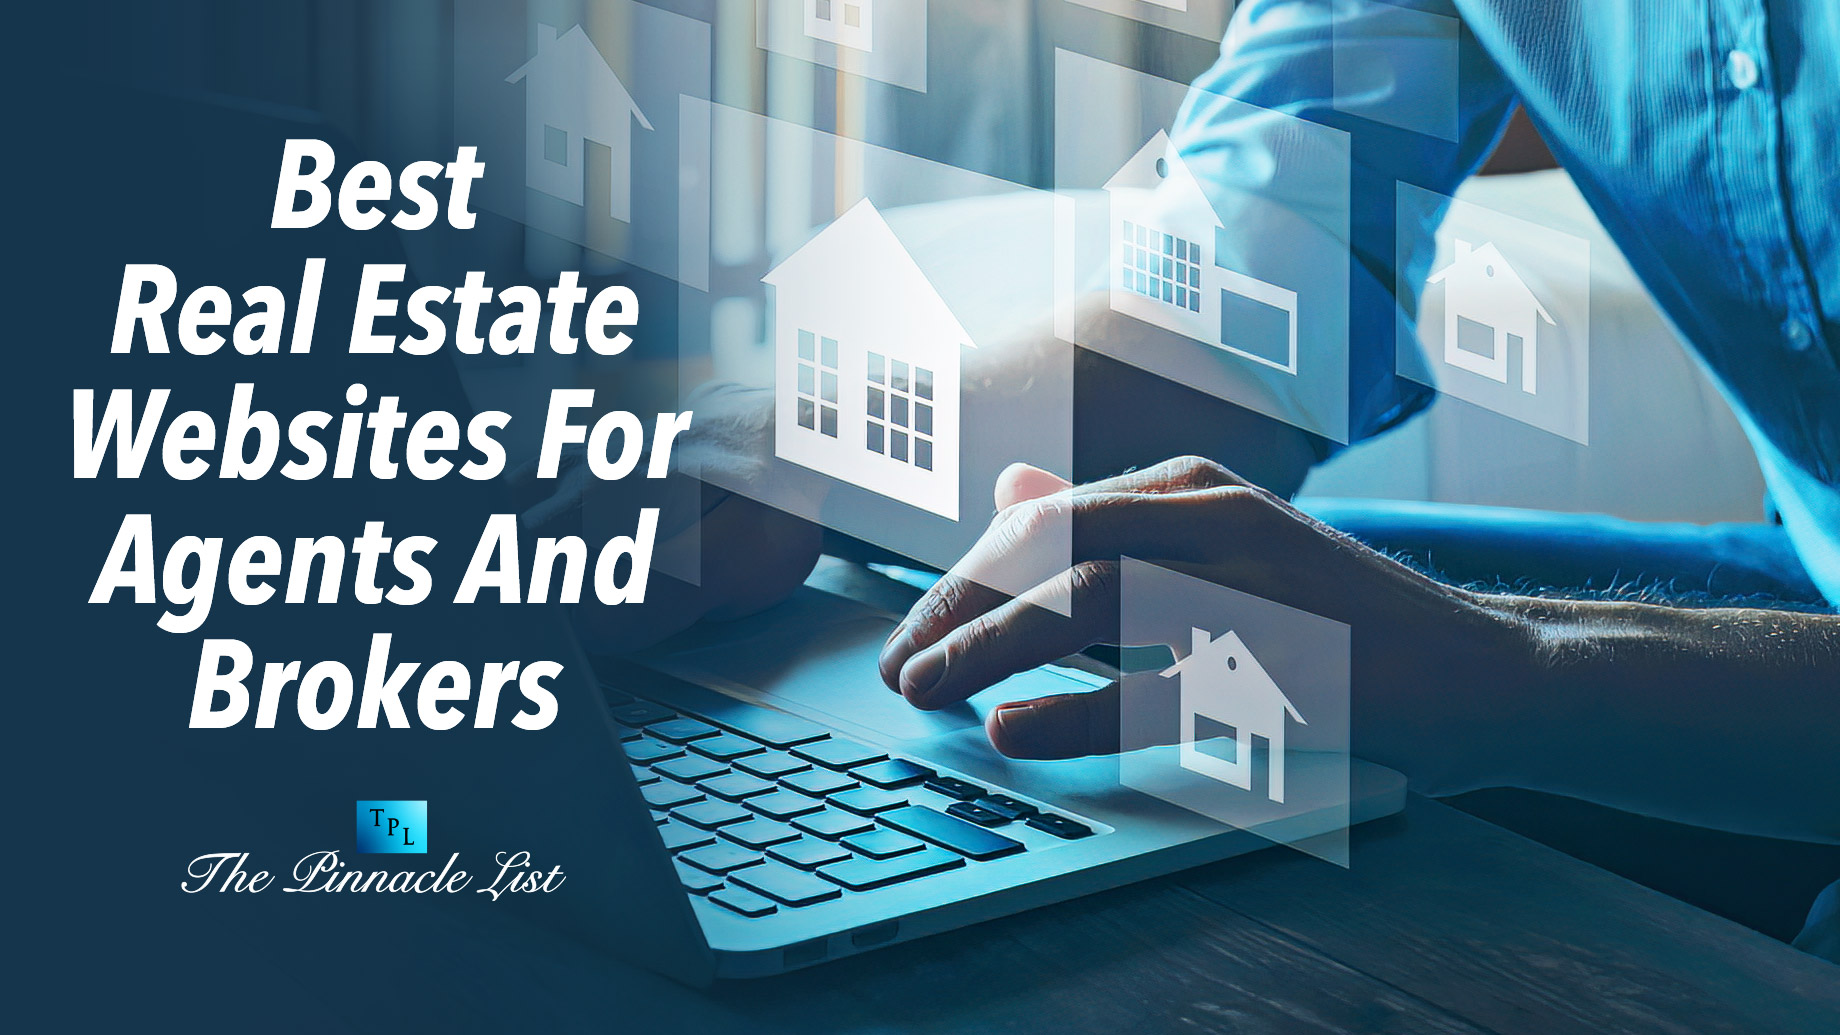 Best Real Estate Websites For Agents And Brokers